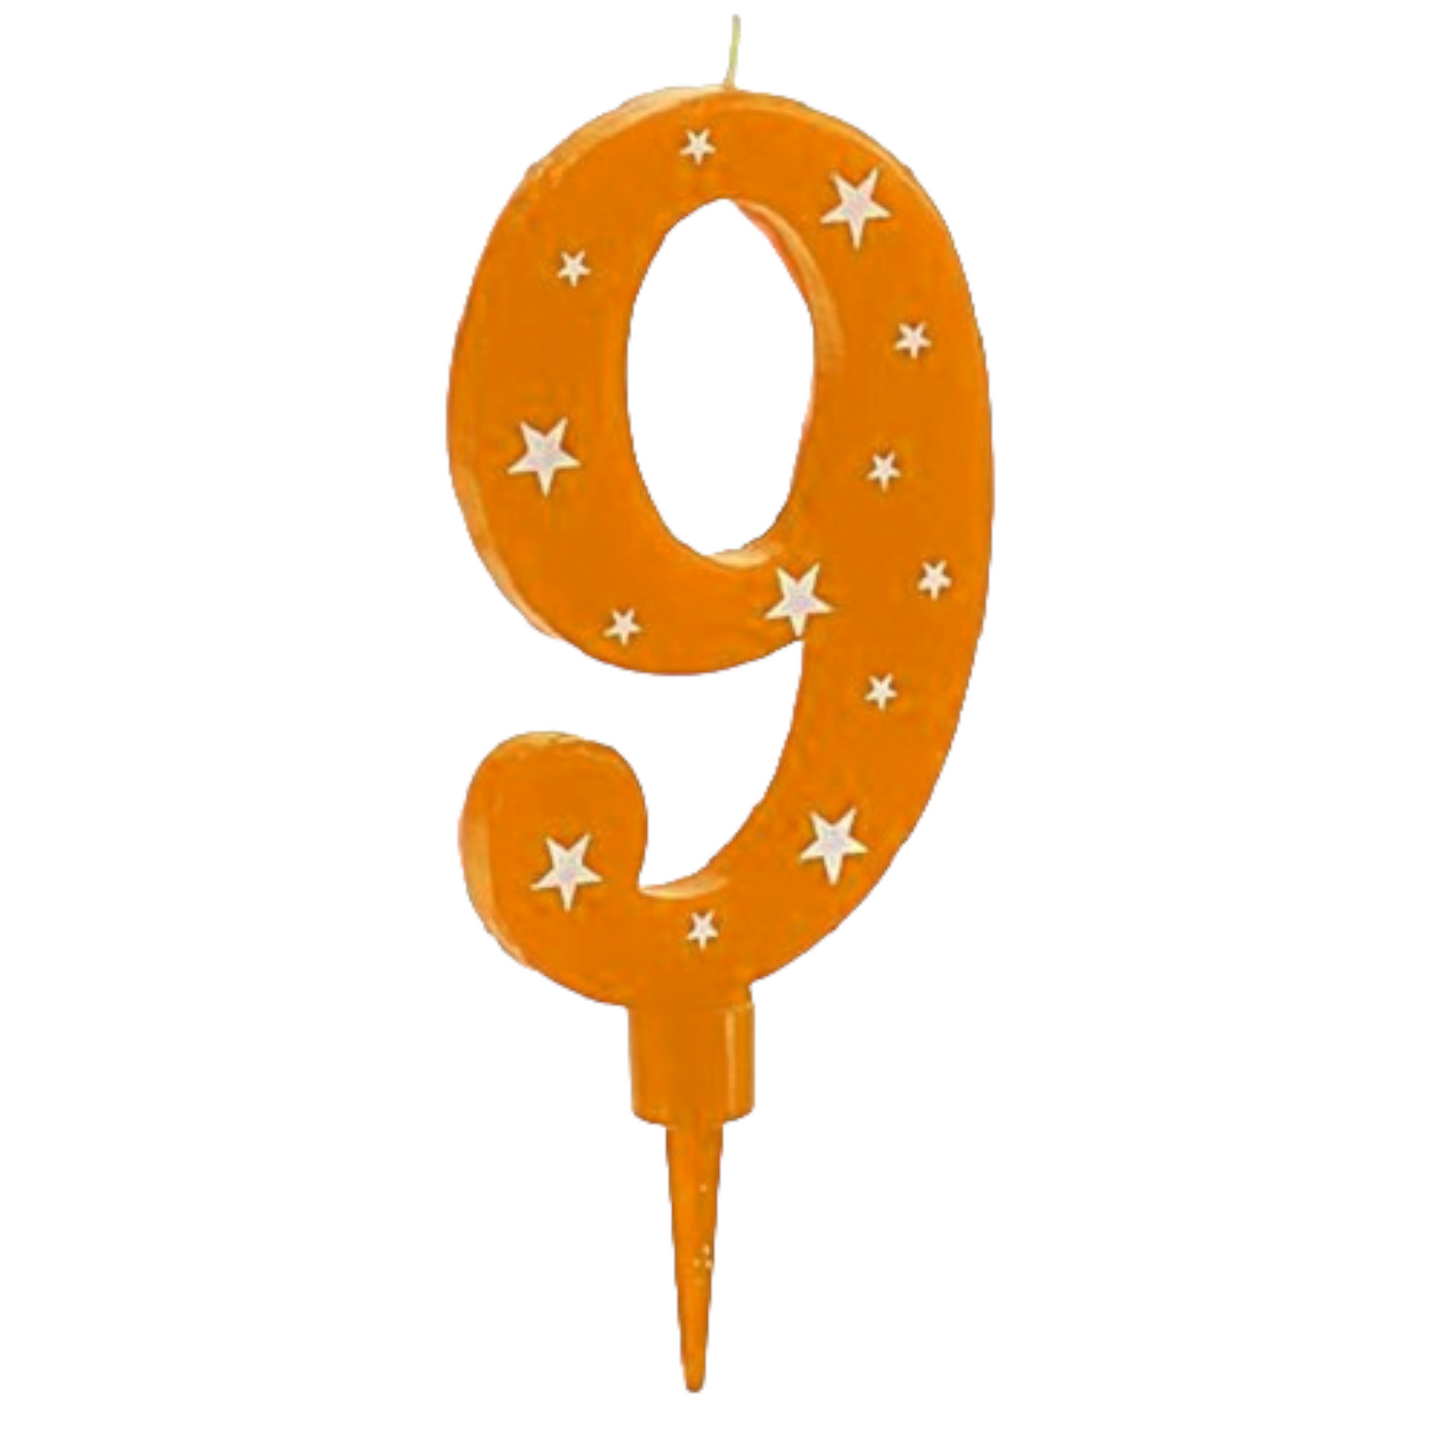 Super offer!!! Big colored birthday numbers with stars.